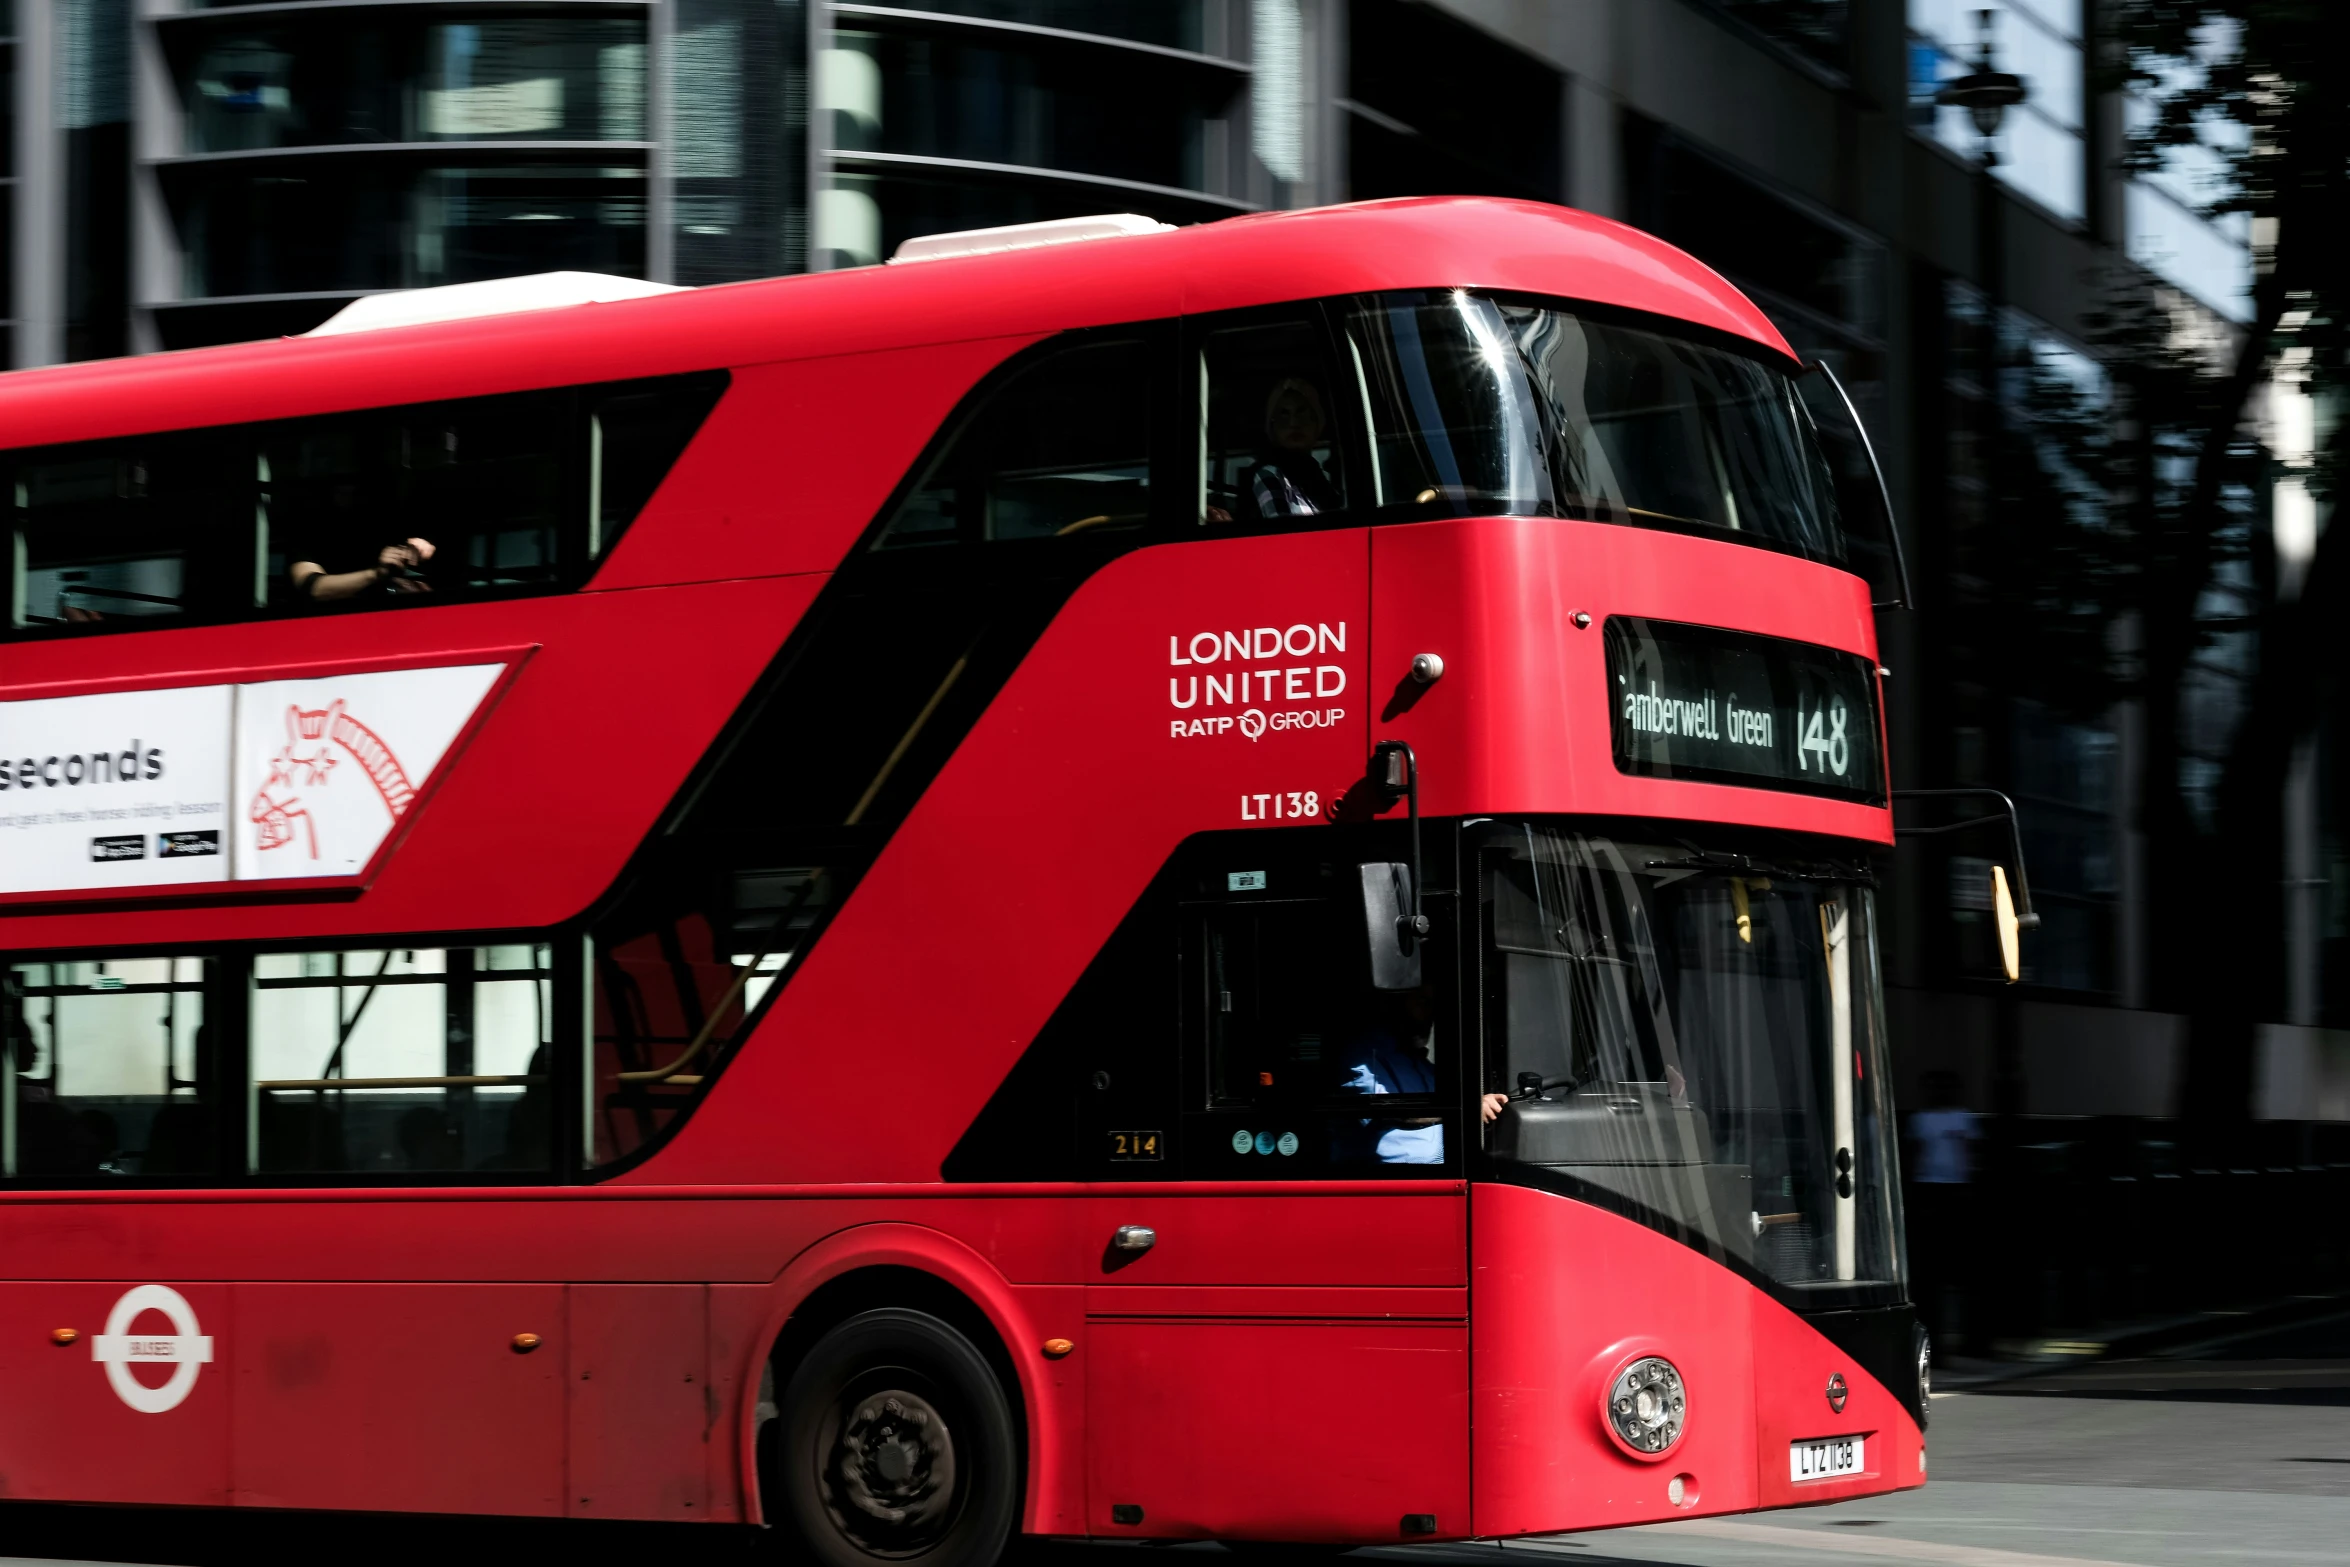 a red double decker bus with advertits on the side